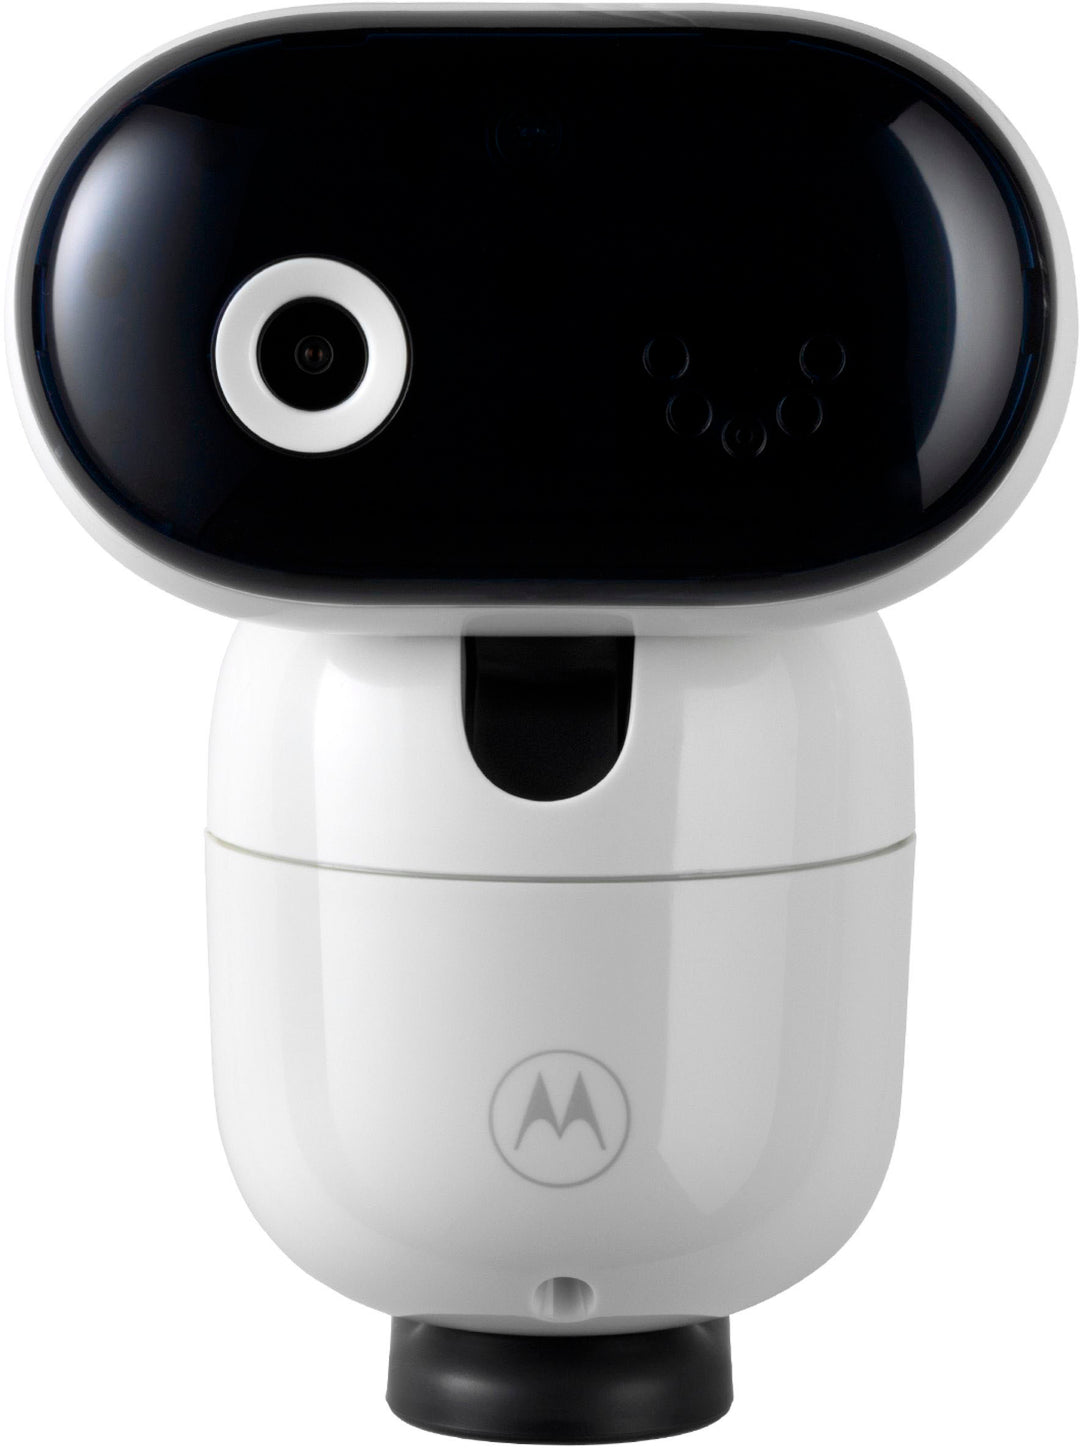 Motorola - PIP1510-2 CONNECT 5" WiFi Video Baby Monitor with 2 Cameras - White_1